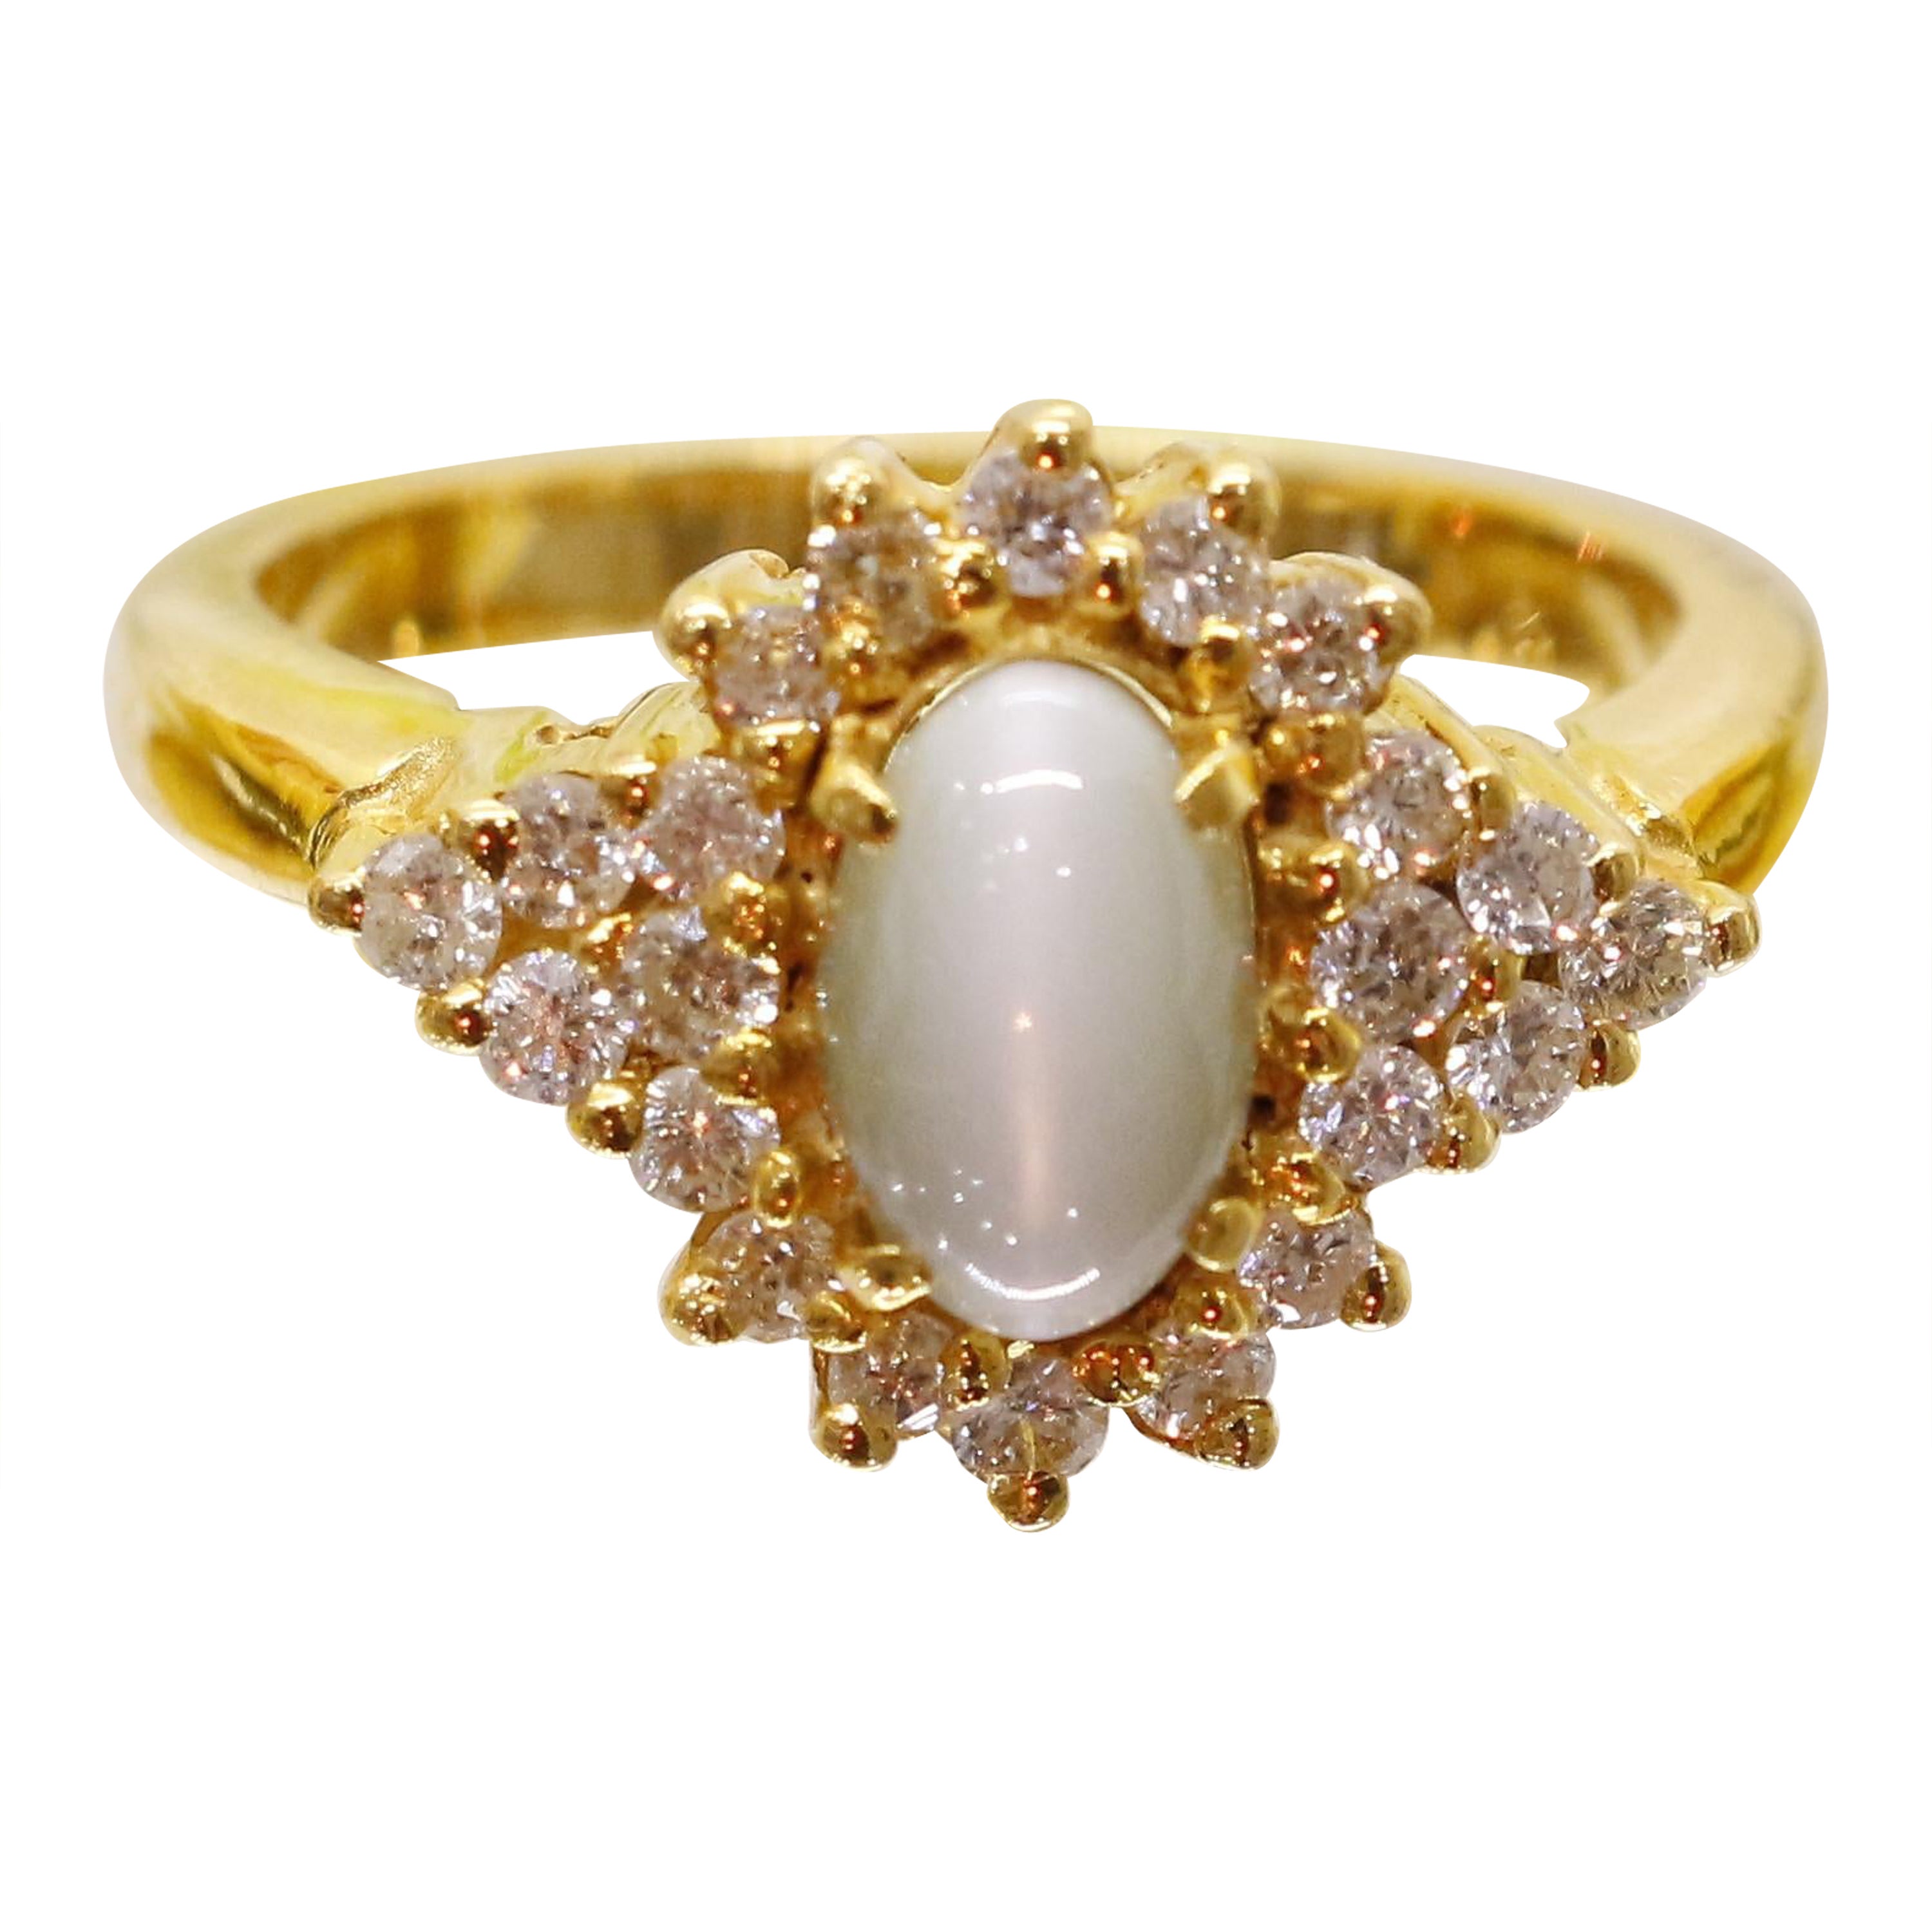 5 CT Natural Cats Eye Diamond Ring For Sale